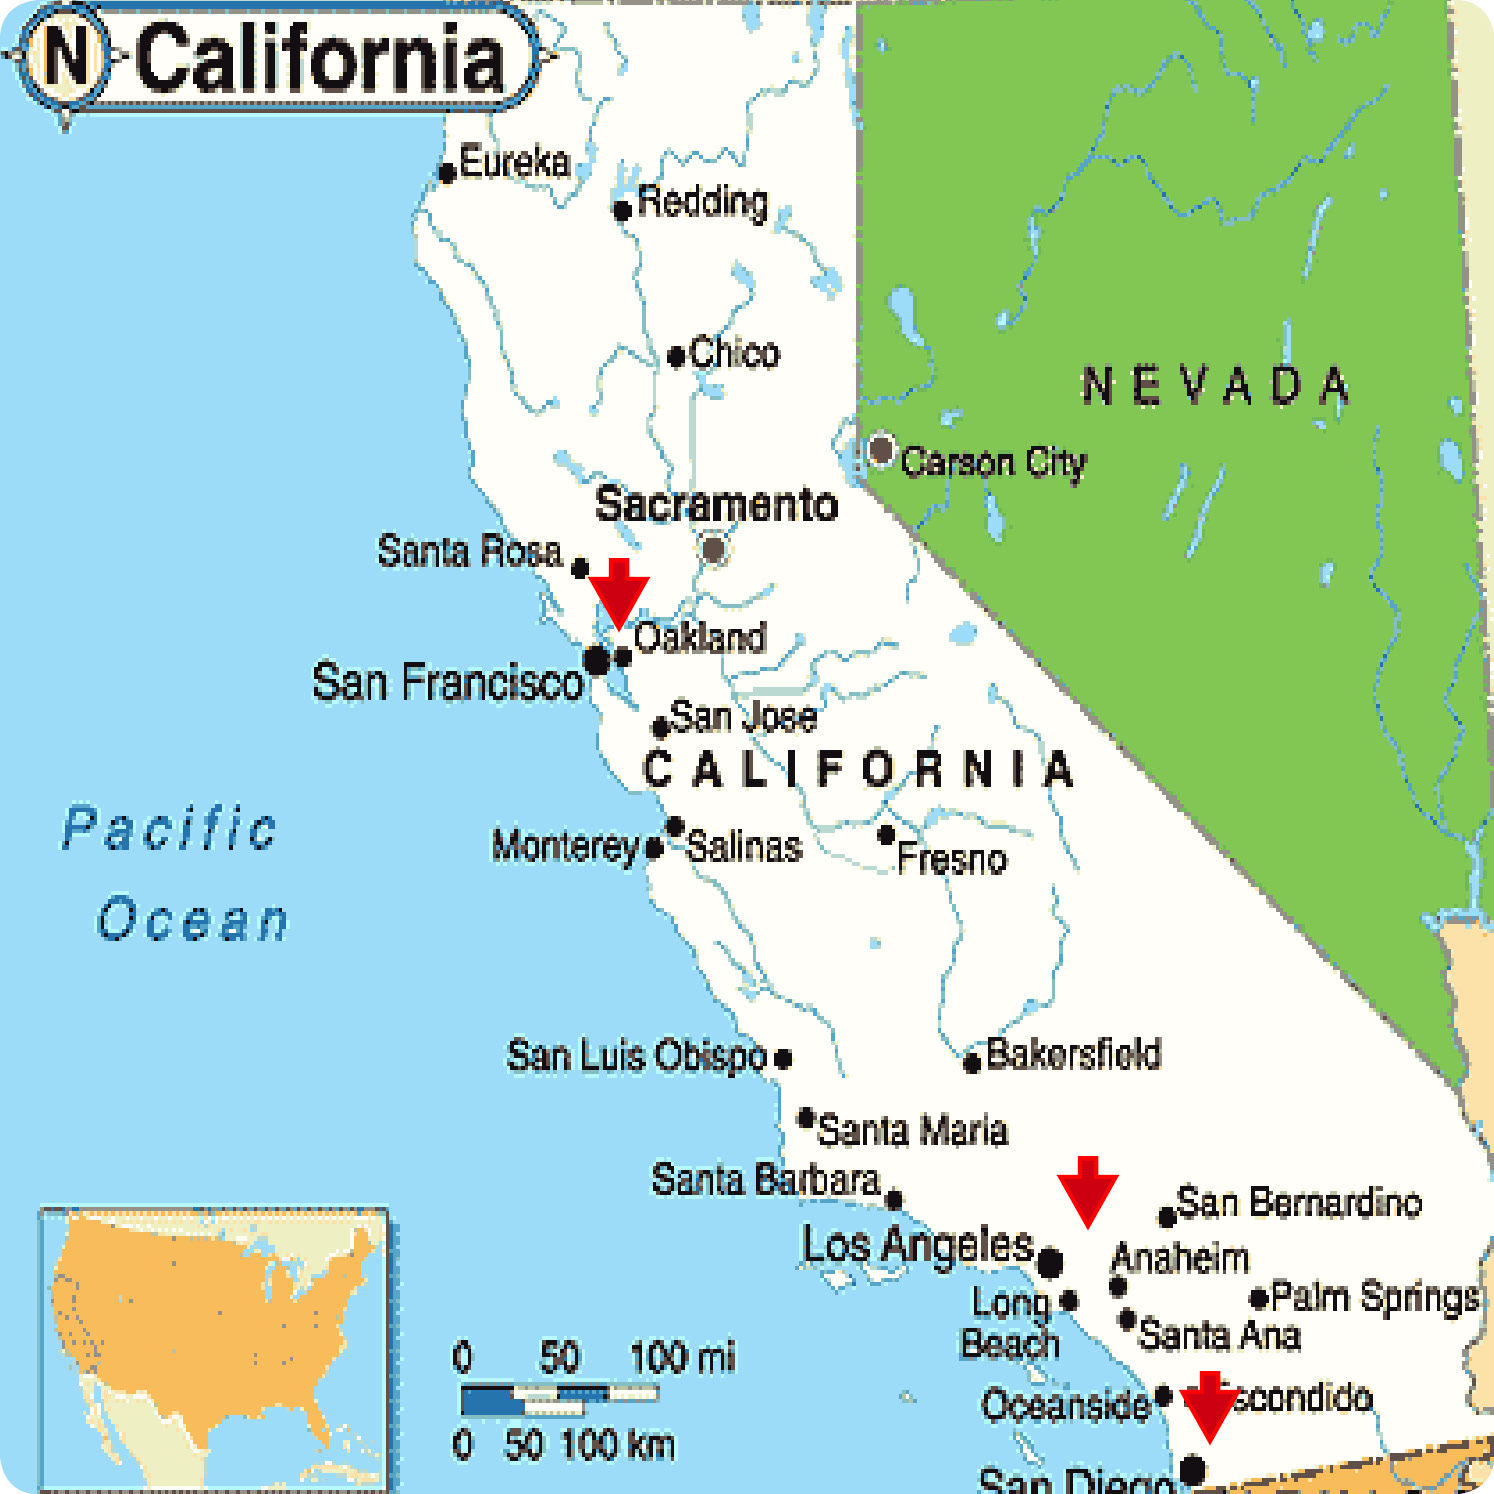 California Map Major California City Map - Collection of Maps Images ...